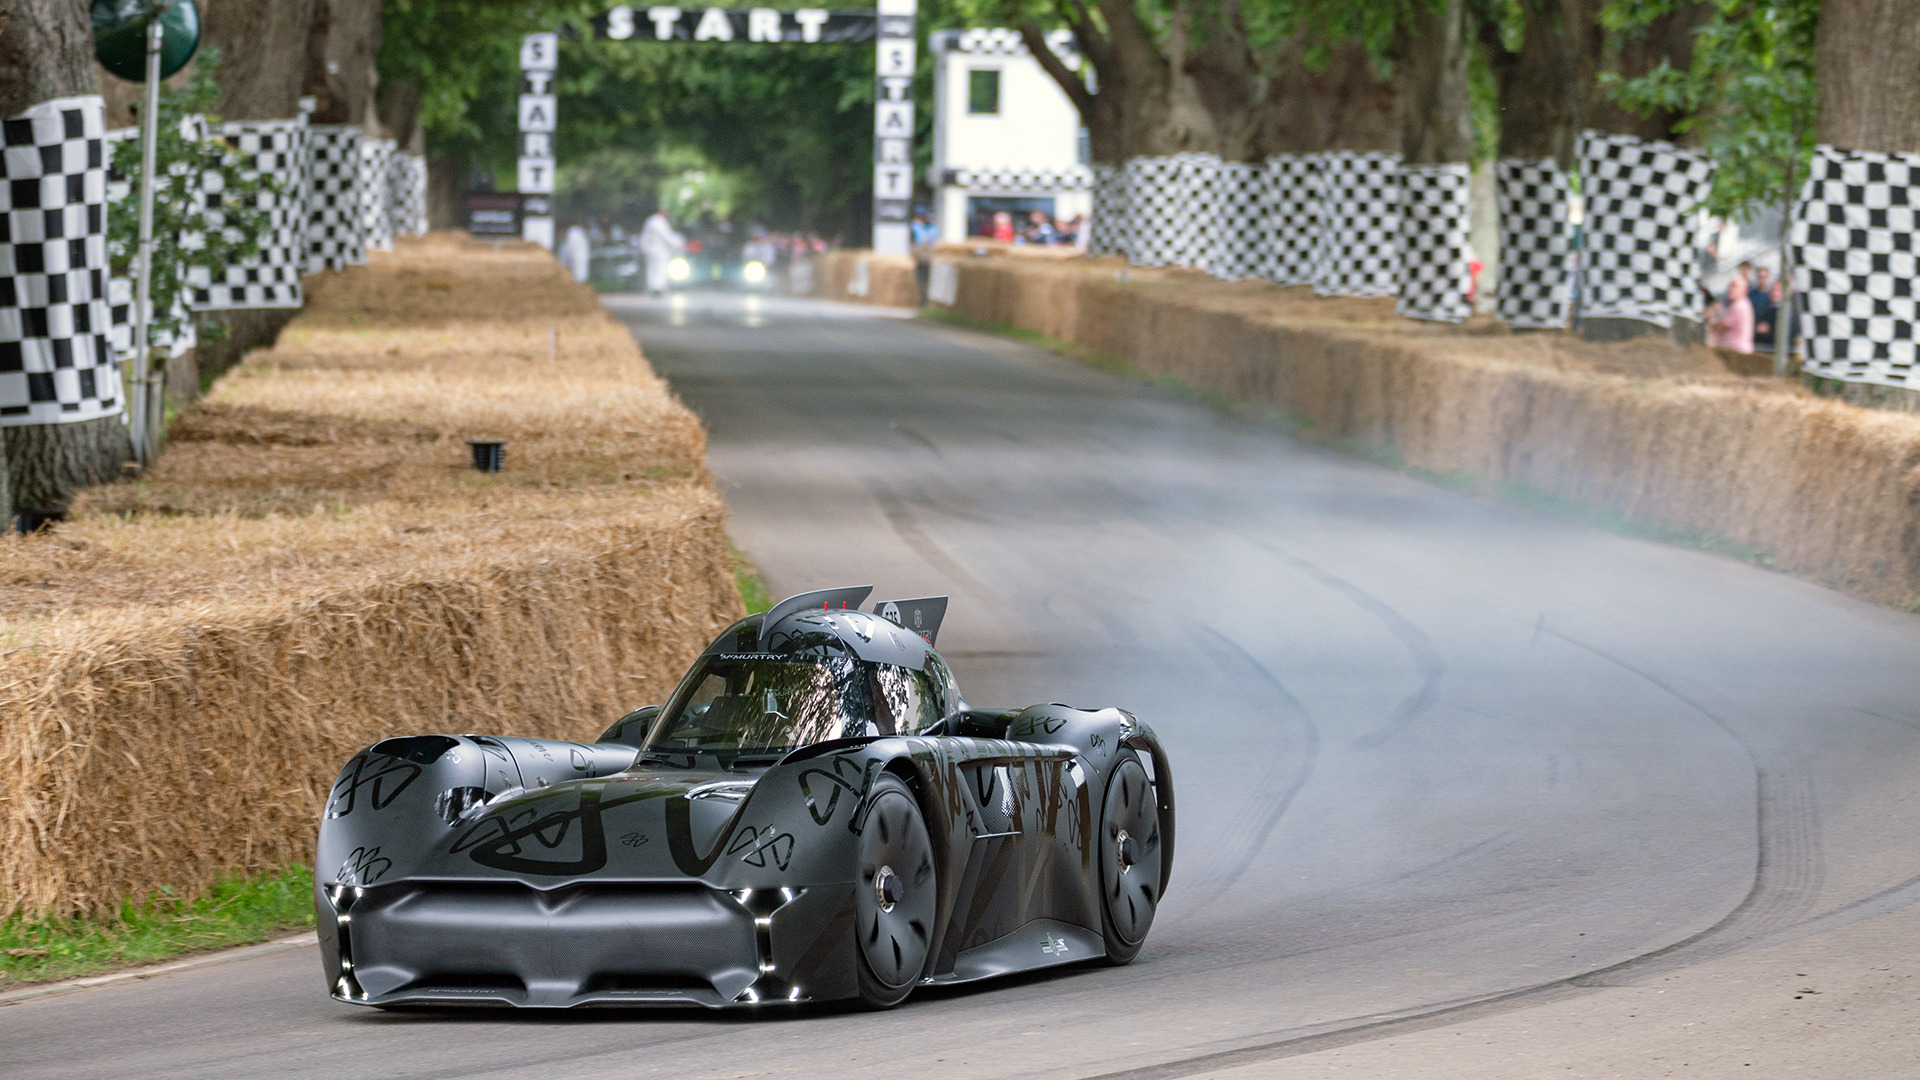 The McMurtry Speirling Broke the Goodwood Record with Sim-Racing